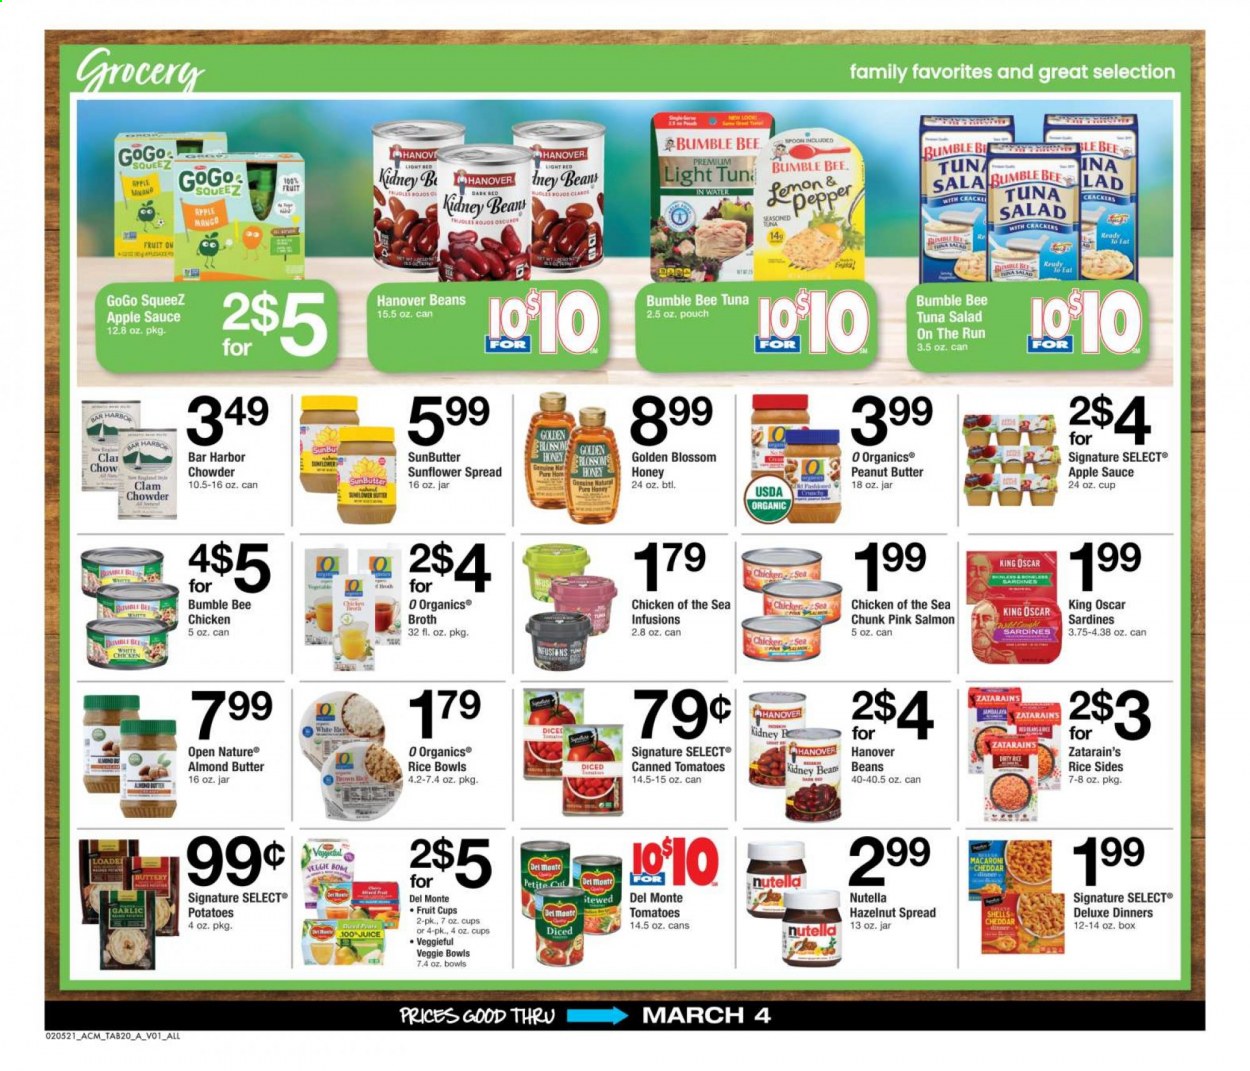 thumbnail - ACME Flyer - 02/05/2021 - 03/04/2021 - Sales products - fruit cup, salmon, sardines, tuna, salad, sauce, tuna salad, almond butter, Blossom, beans, Nutella, broth, kidney beans, Chicken of the Sea, clam chowder, apple sauce, honey, peanut butter, hazelnut spread, almonds. Page 20.